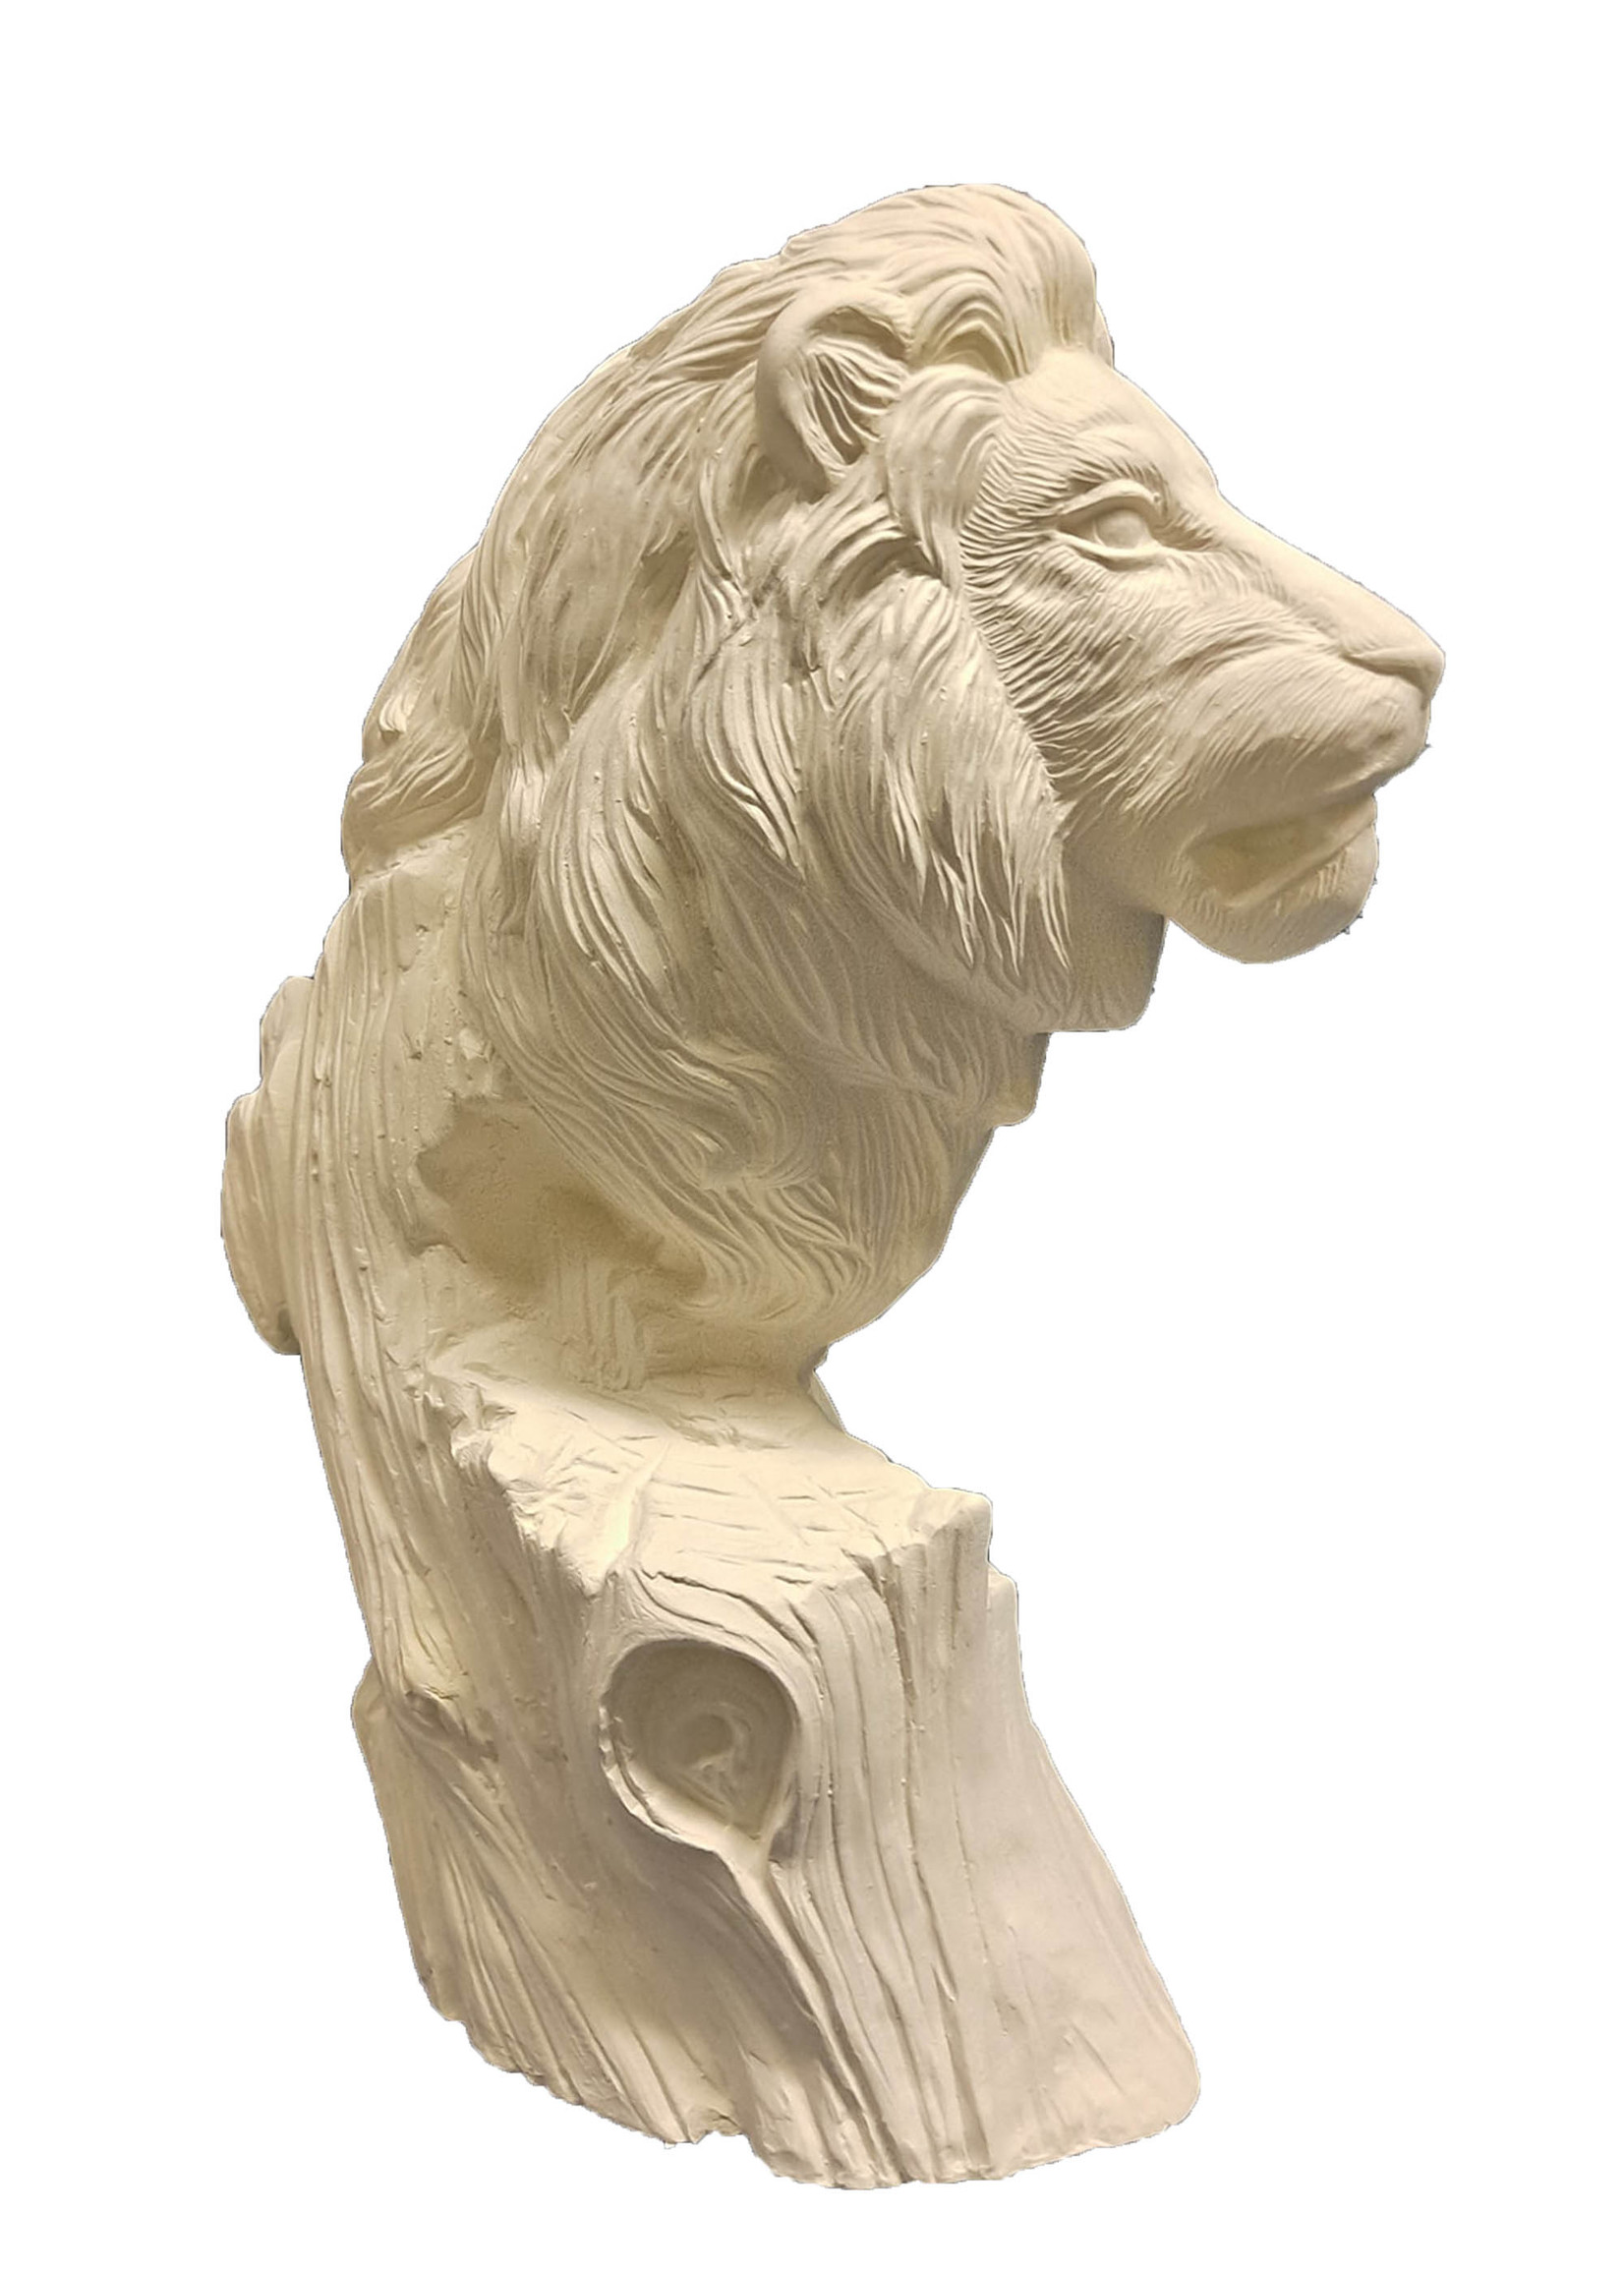 Creative Kreations Ceramics and Gifts Driftwood Lion 9" Ceramic Bisque Ready to Paint